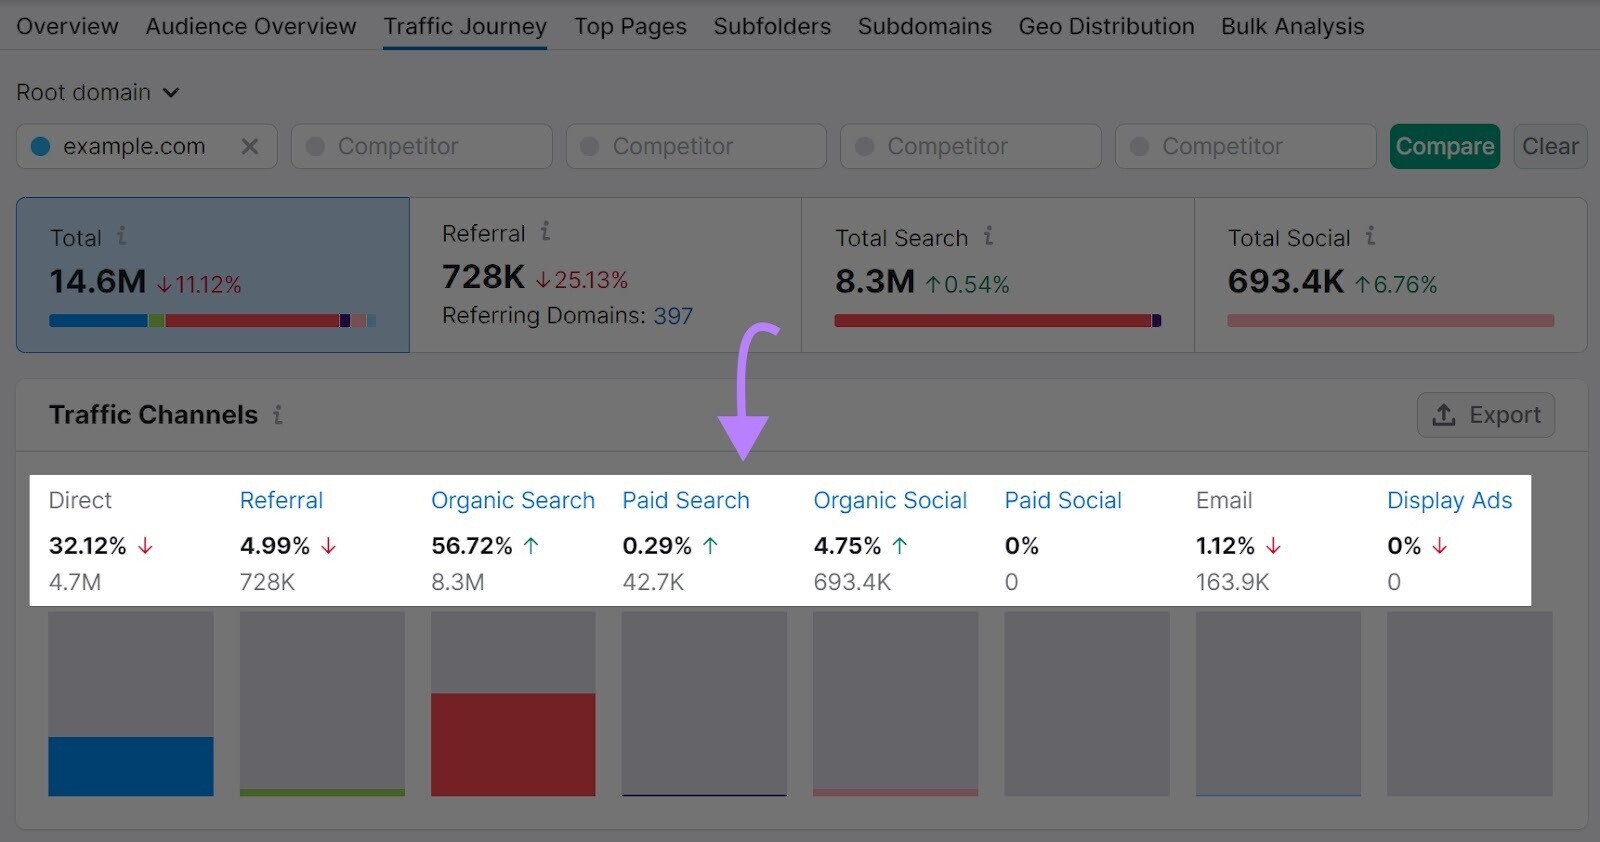 in "Traffic Journey" you can find the percentage of traffic your competitors get from various channels, including referral, organic search, paid social etc.